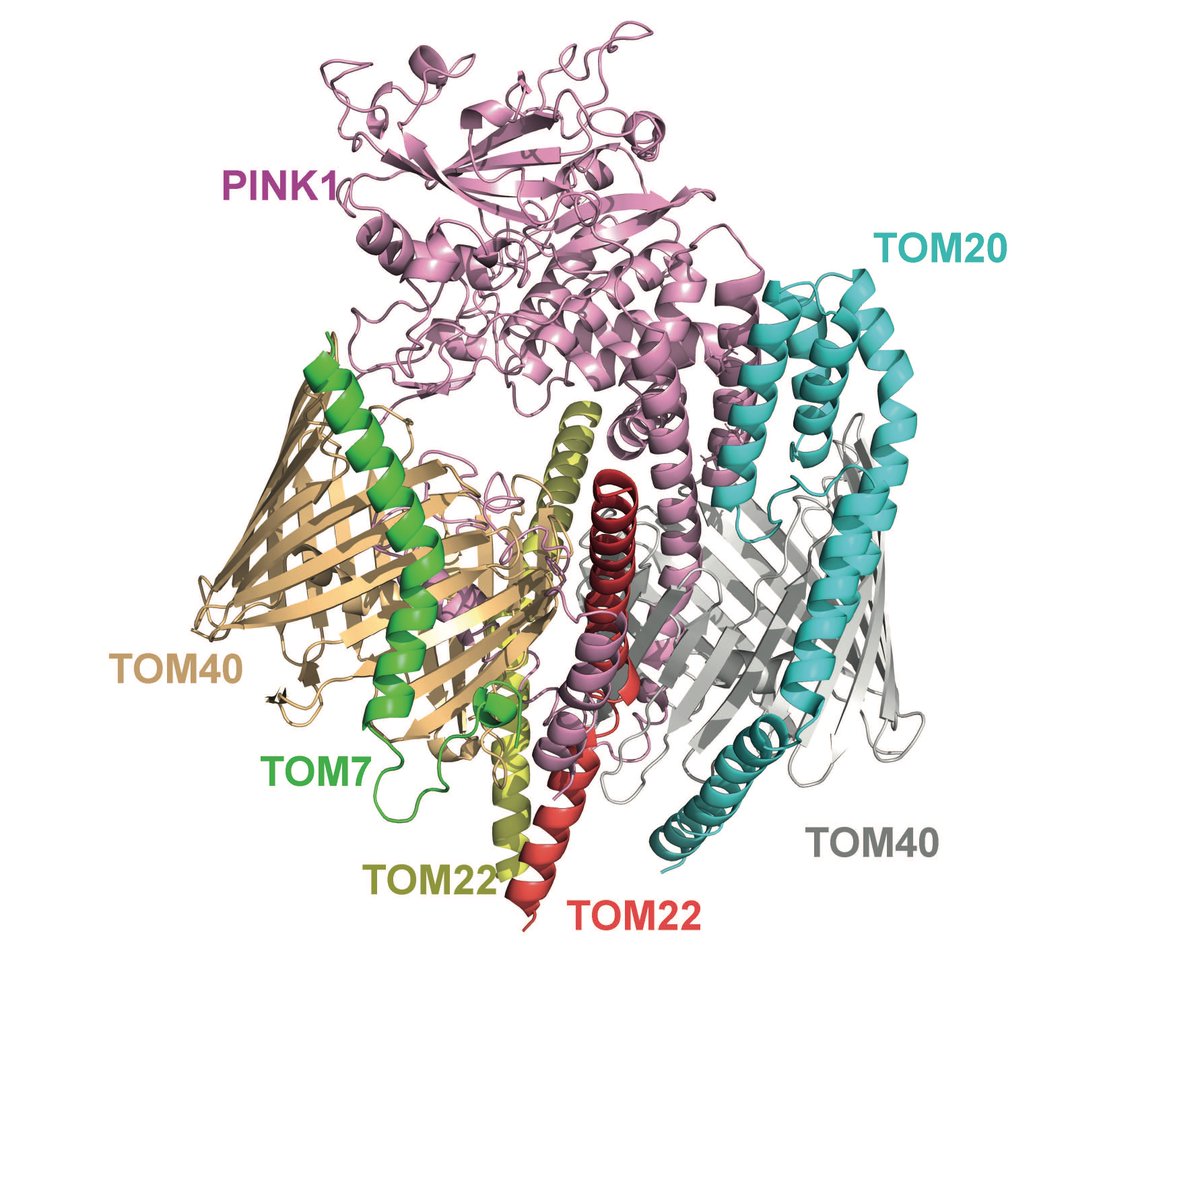 Out Now! Our new preprint of mechanism of #PINK1 activation at TOM complex. Led by Wale @waleraimi & Hina @mrcppu Fantastic collaboration with @ruferbus Sebastian Mathea @ASAP_Research Karim Labib @naranson @TDDeego. #OpenScience click here surl.li/oqvpt